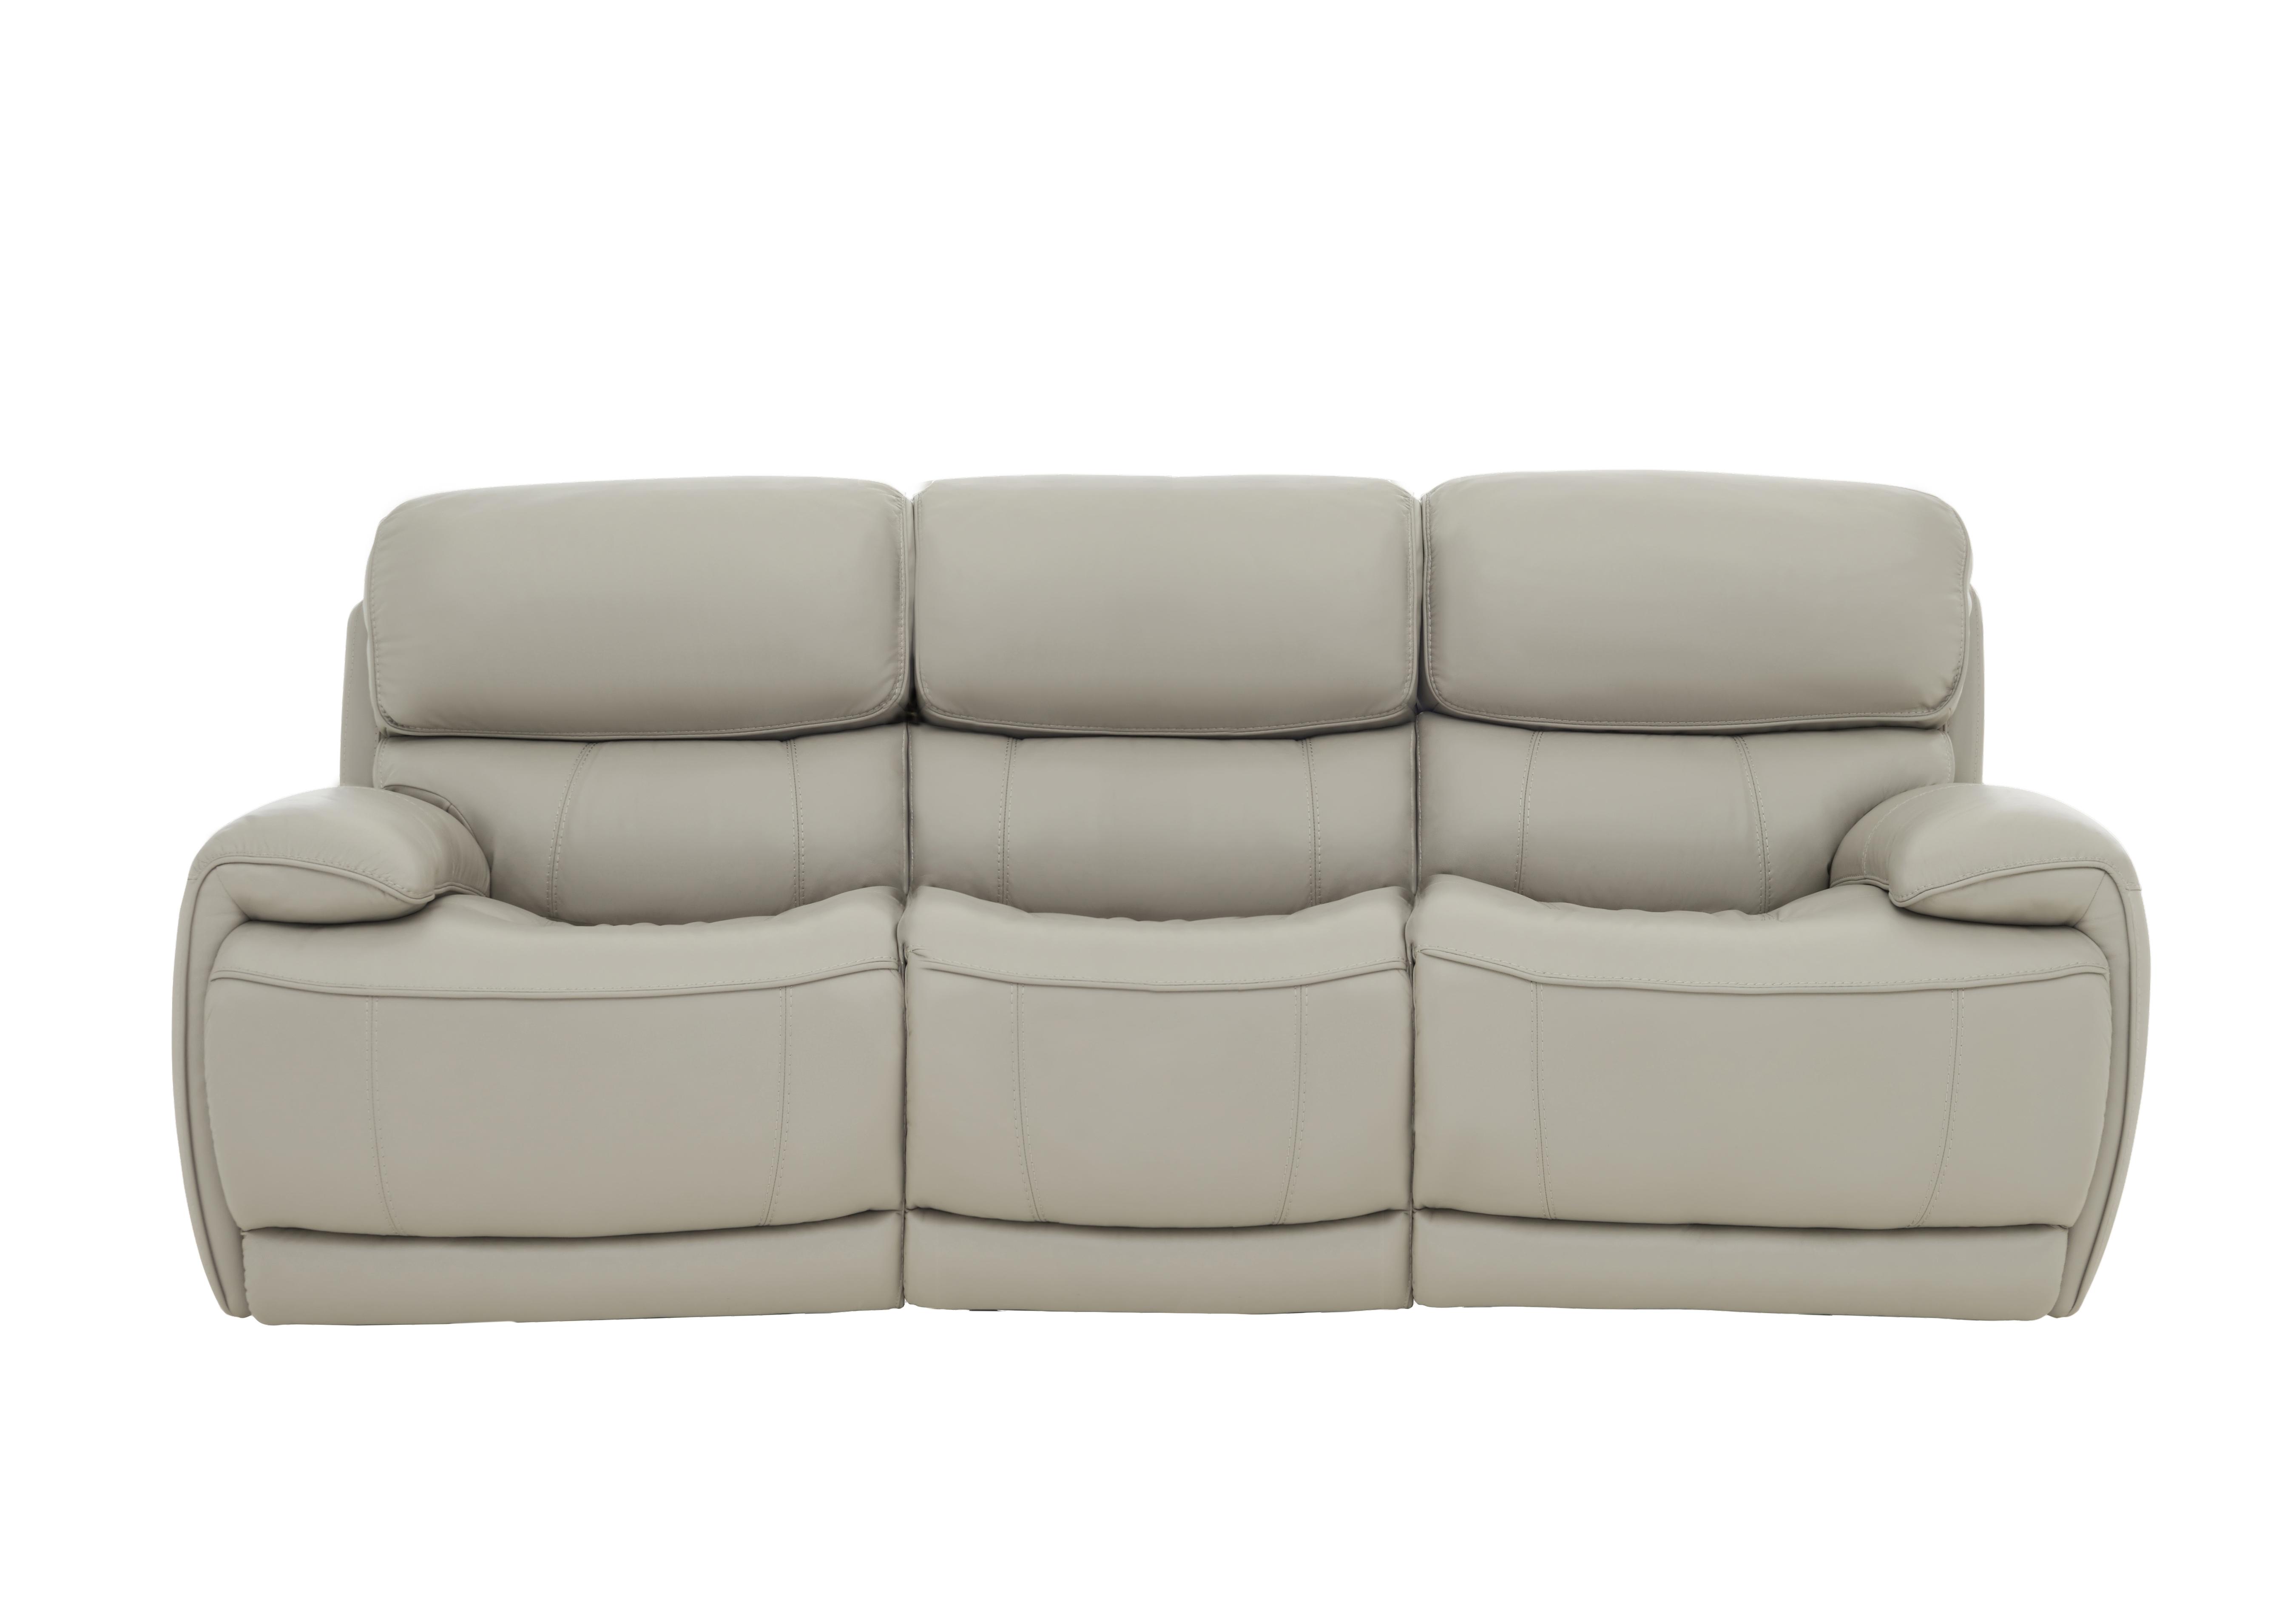 Rocco 3 Seater Leather Power Rocker Sofa with Power Headrests in Nc-946b Feather Grey on Furniture Village